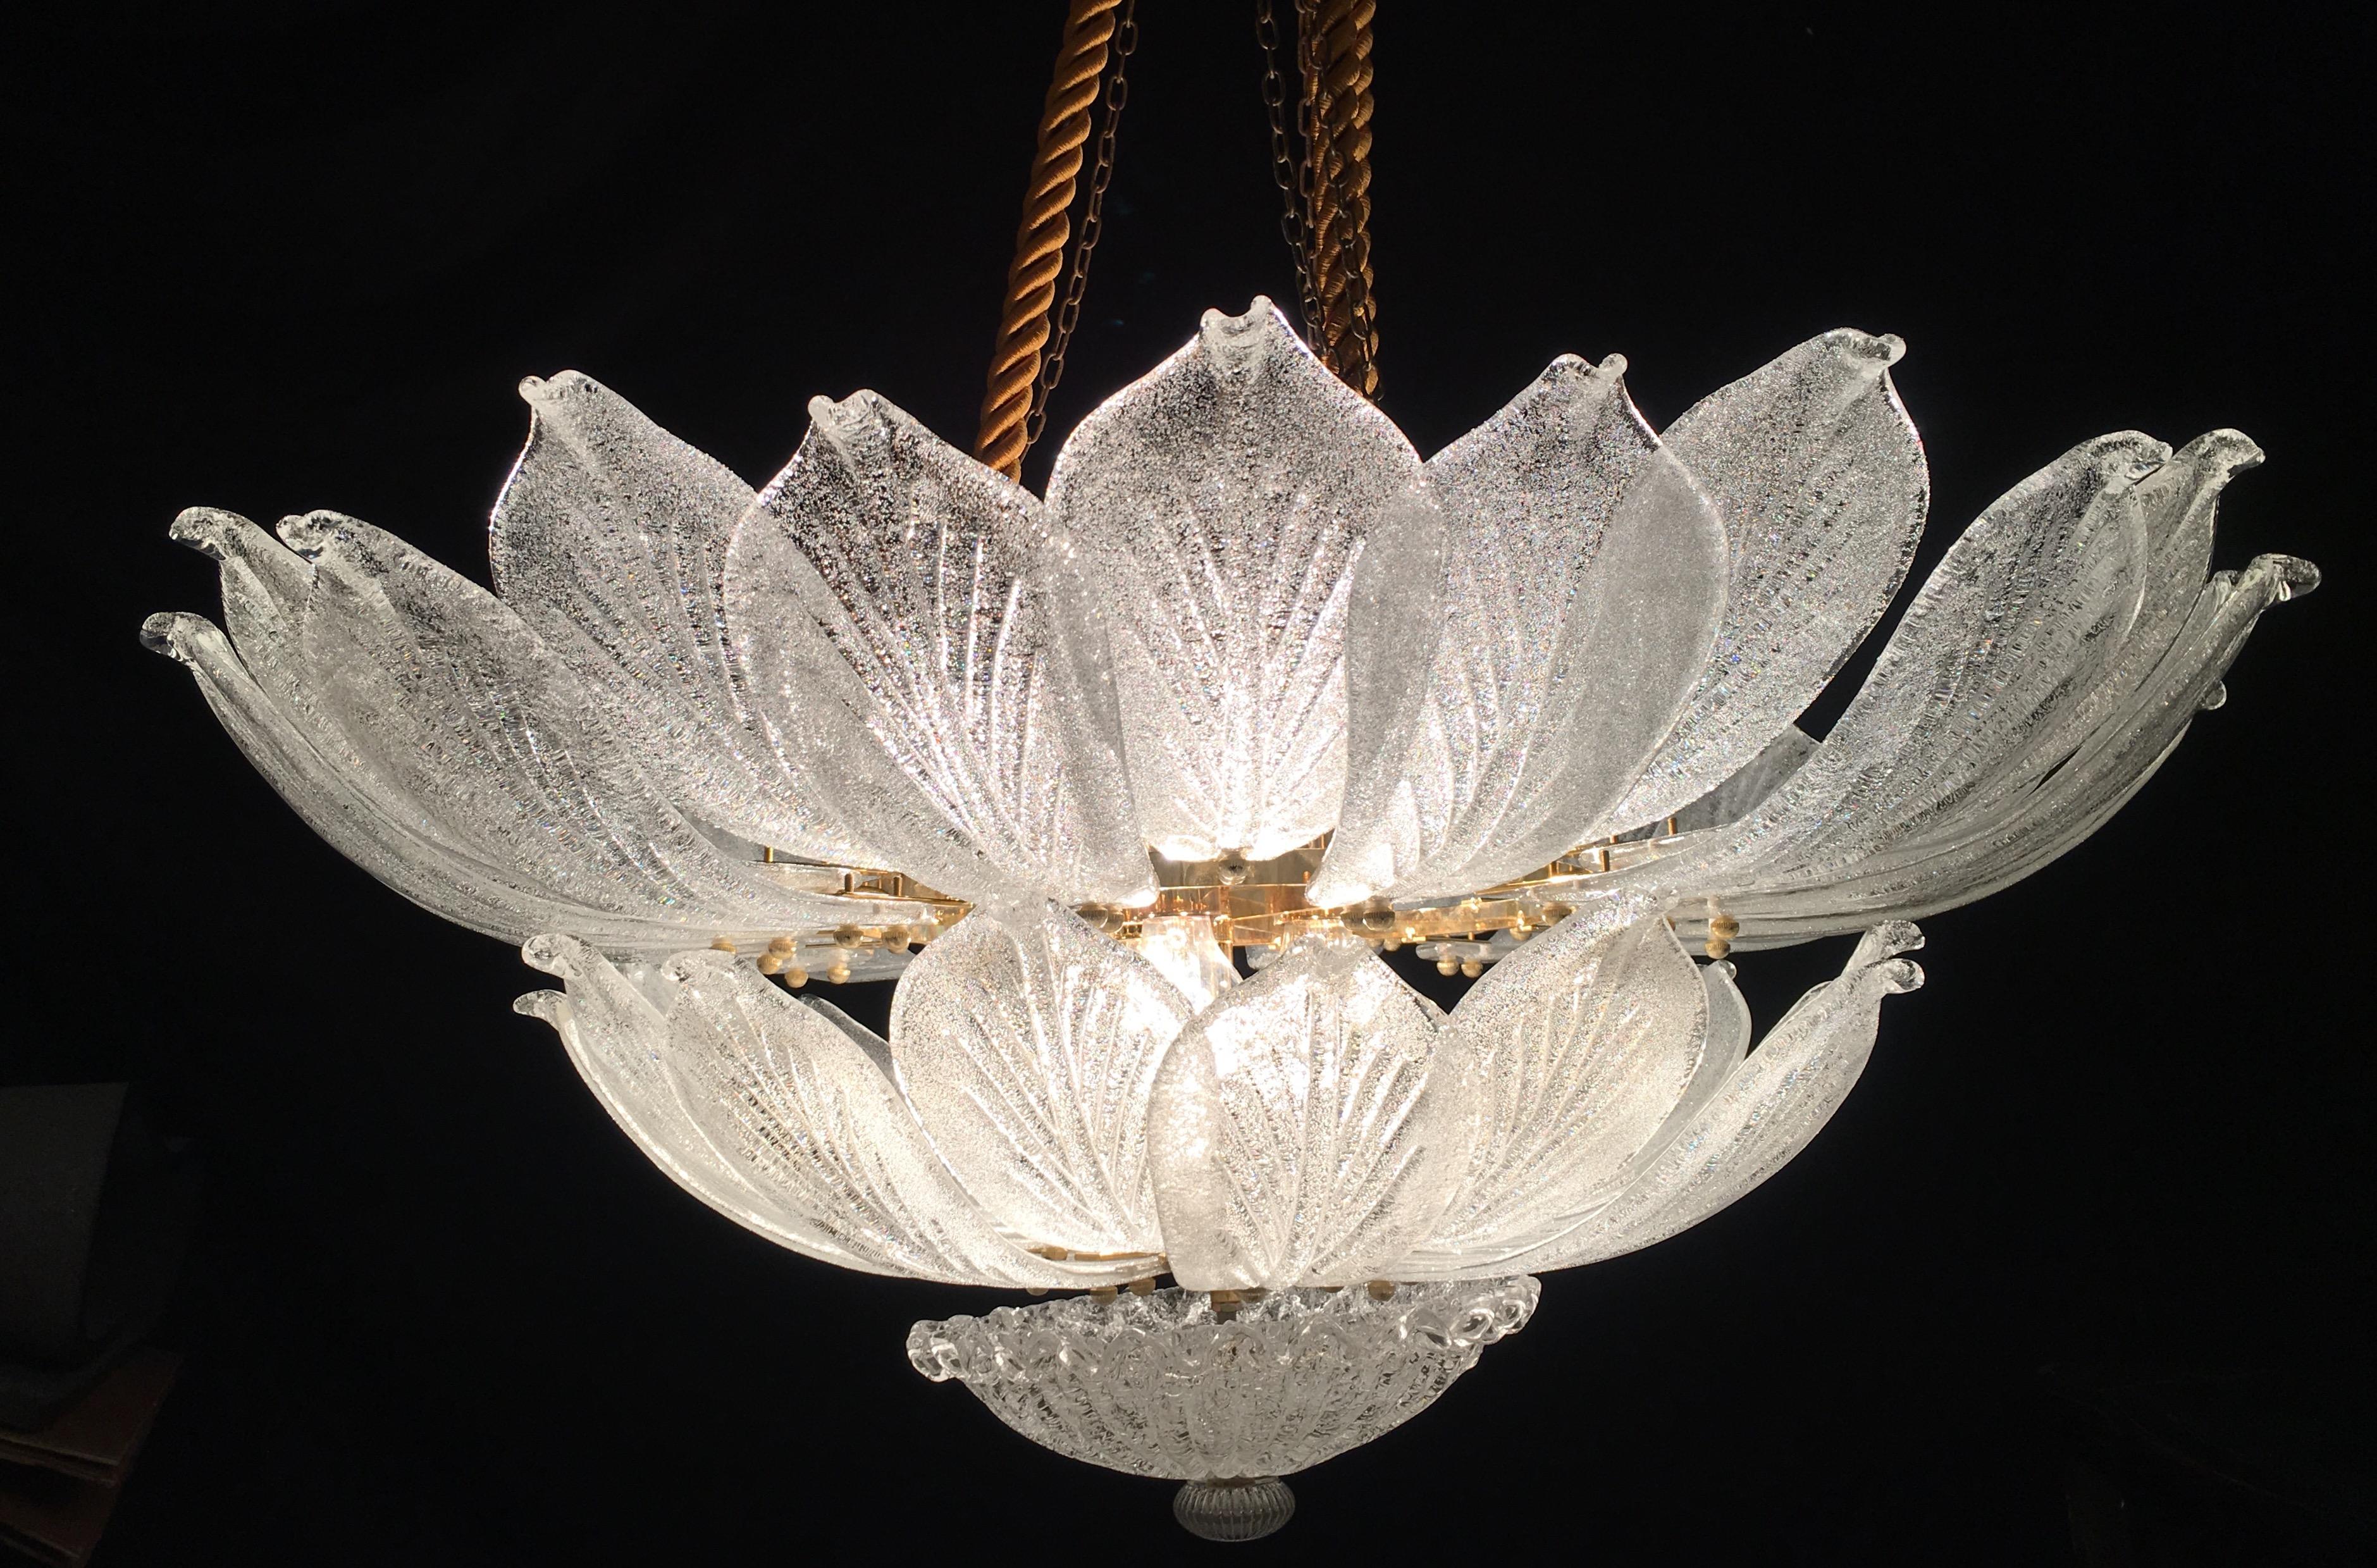 This striking ceiling light is realized in pure Murano glass, each chandelier consists of an incredible number of leaves with gold intrusion.
Gold-plated frame with 12 E 27 bulbs spread a magical light.
Available also a pair.
By Veneziani Arte